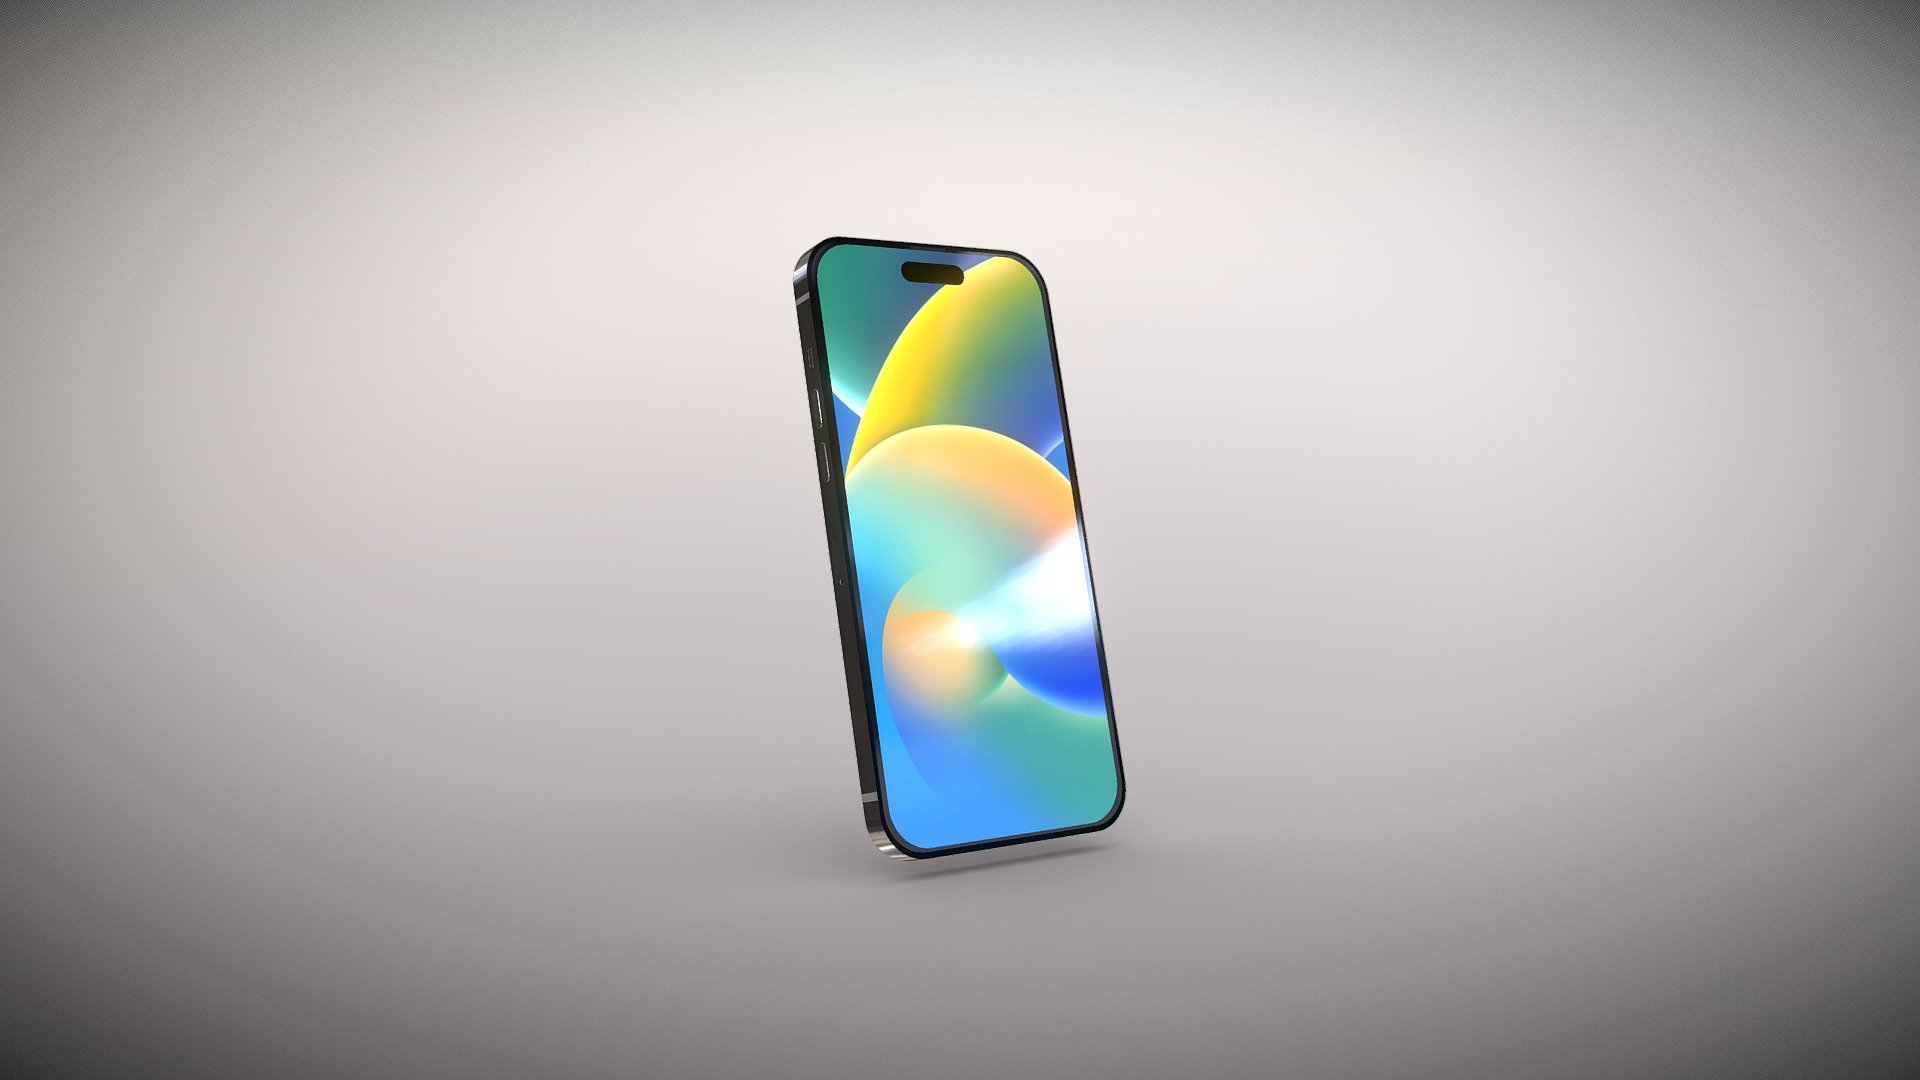 Iphone 14 pro max

made entirely on blender (contains procedural materials )

based on concept and leaks

high detail and low poly

file formats ,.blend,.obj.,dae,.fbx,.mtl

made with correct dimensions and scale

ready to use in blender , everything is packed

faces 20,000 , verts-26000 ,tris -46000 , objects-34 - iphone 14 pro - 3D model by rixpanda 3d model